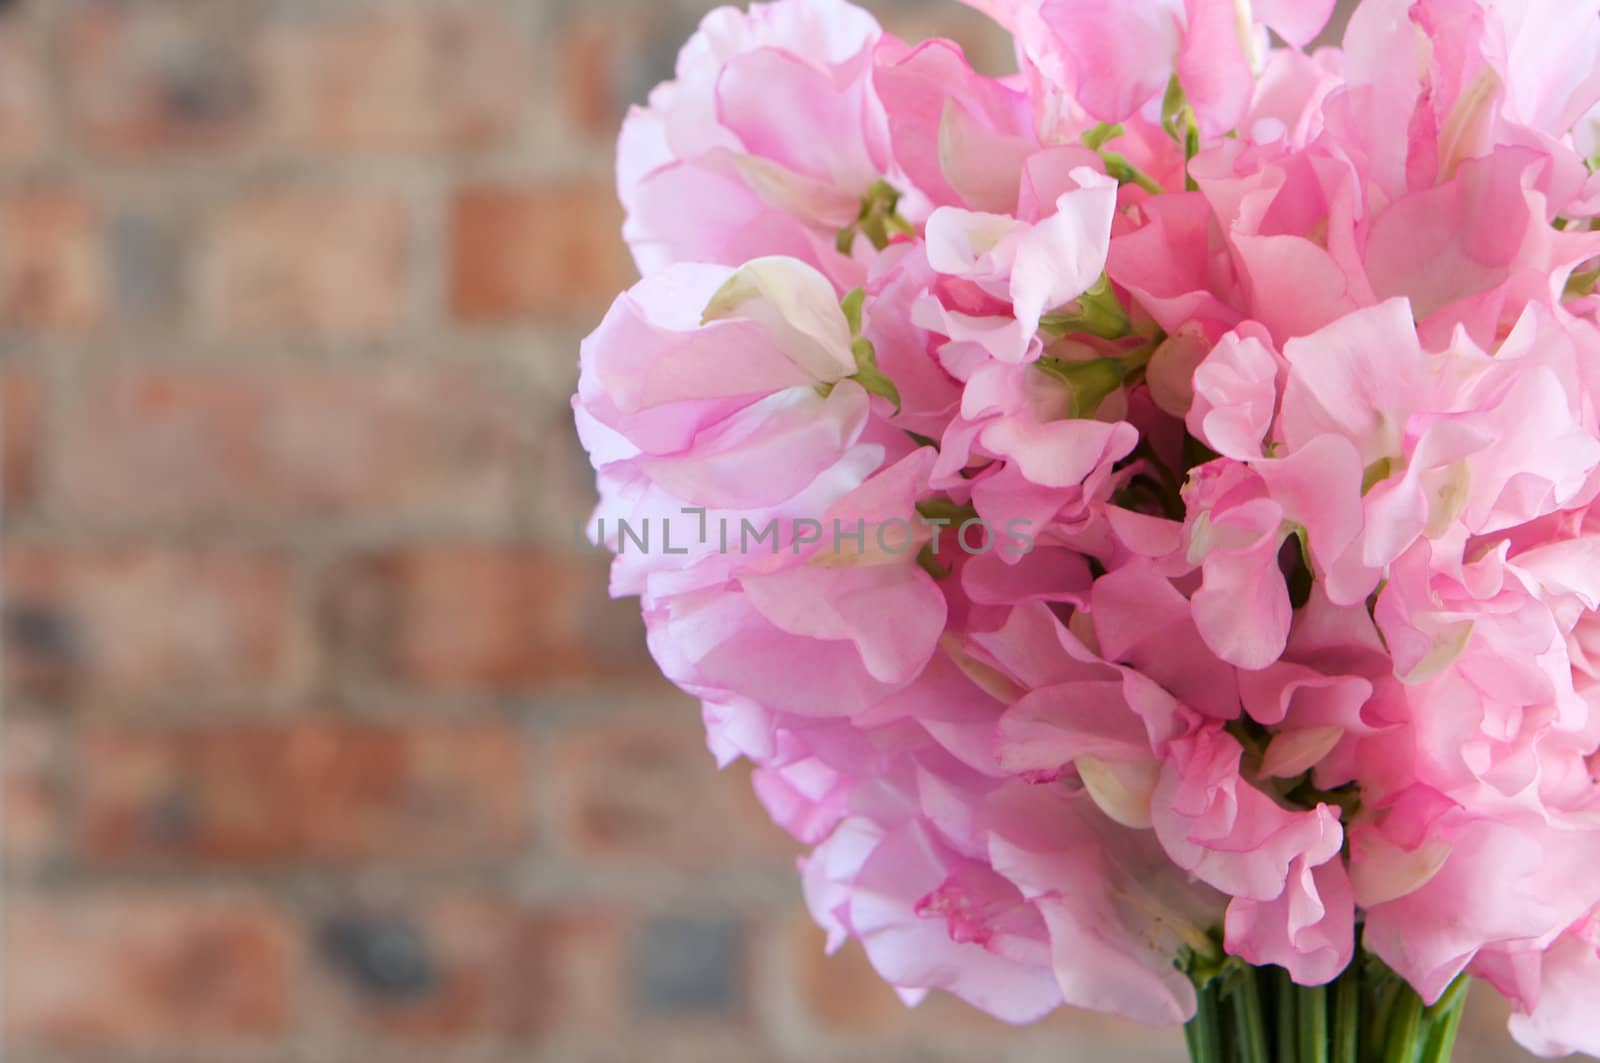 A colorful pink bridal bouquet of flowers by Deimages